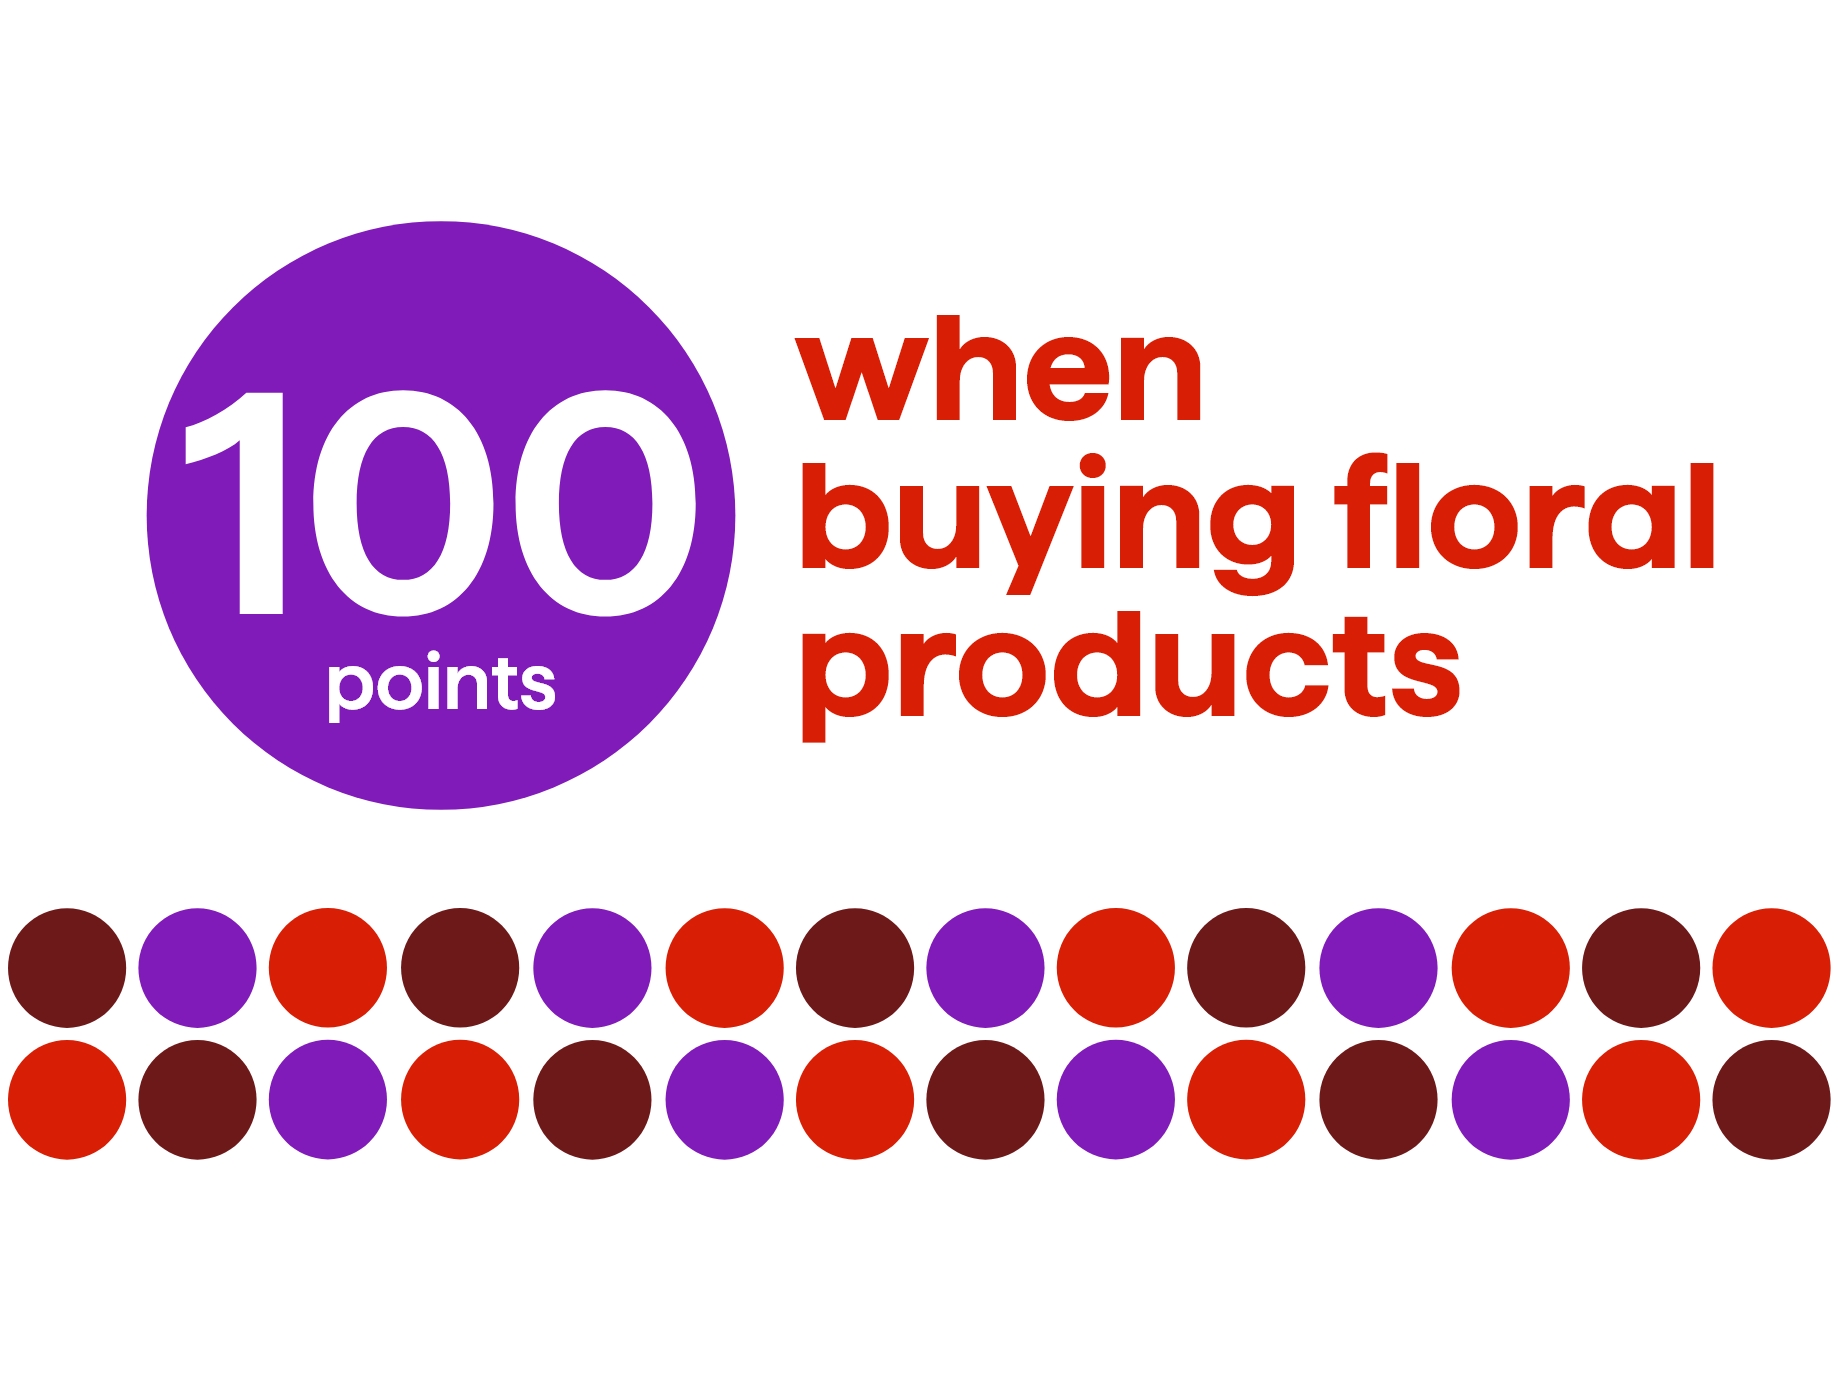 100 pointswhen buying floral products